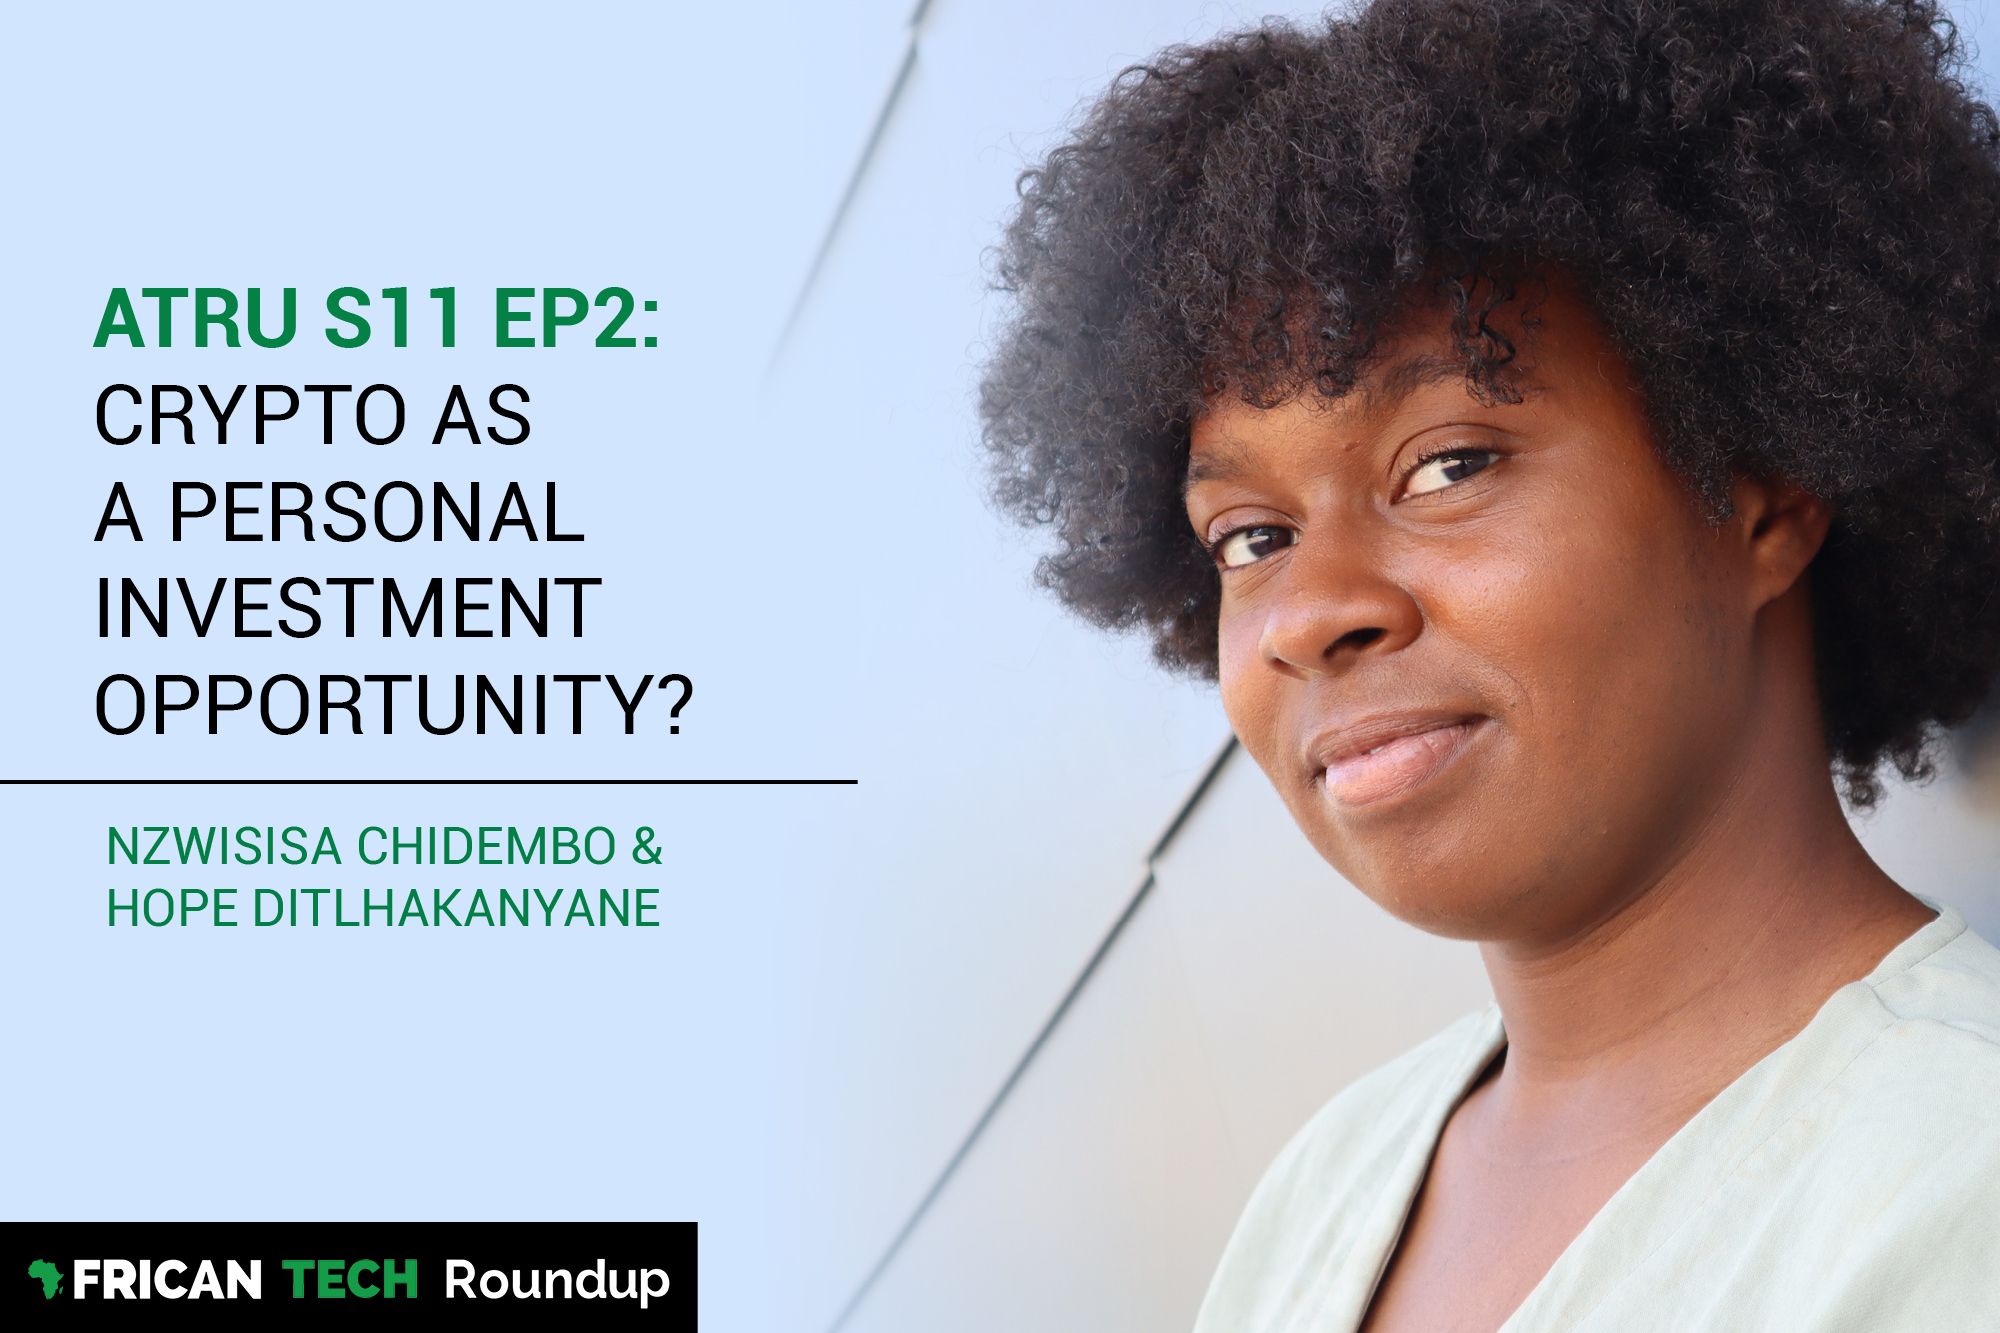 UNAJUA S11 EP2: Crypto as a personal investment opportunity? feat. Hope Ditlhakanyane and Nzwisisa Chidembo